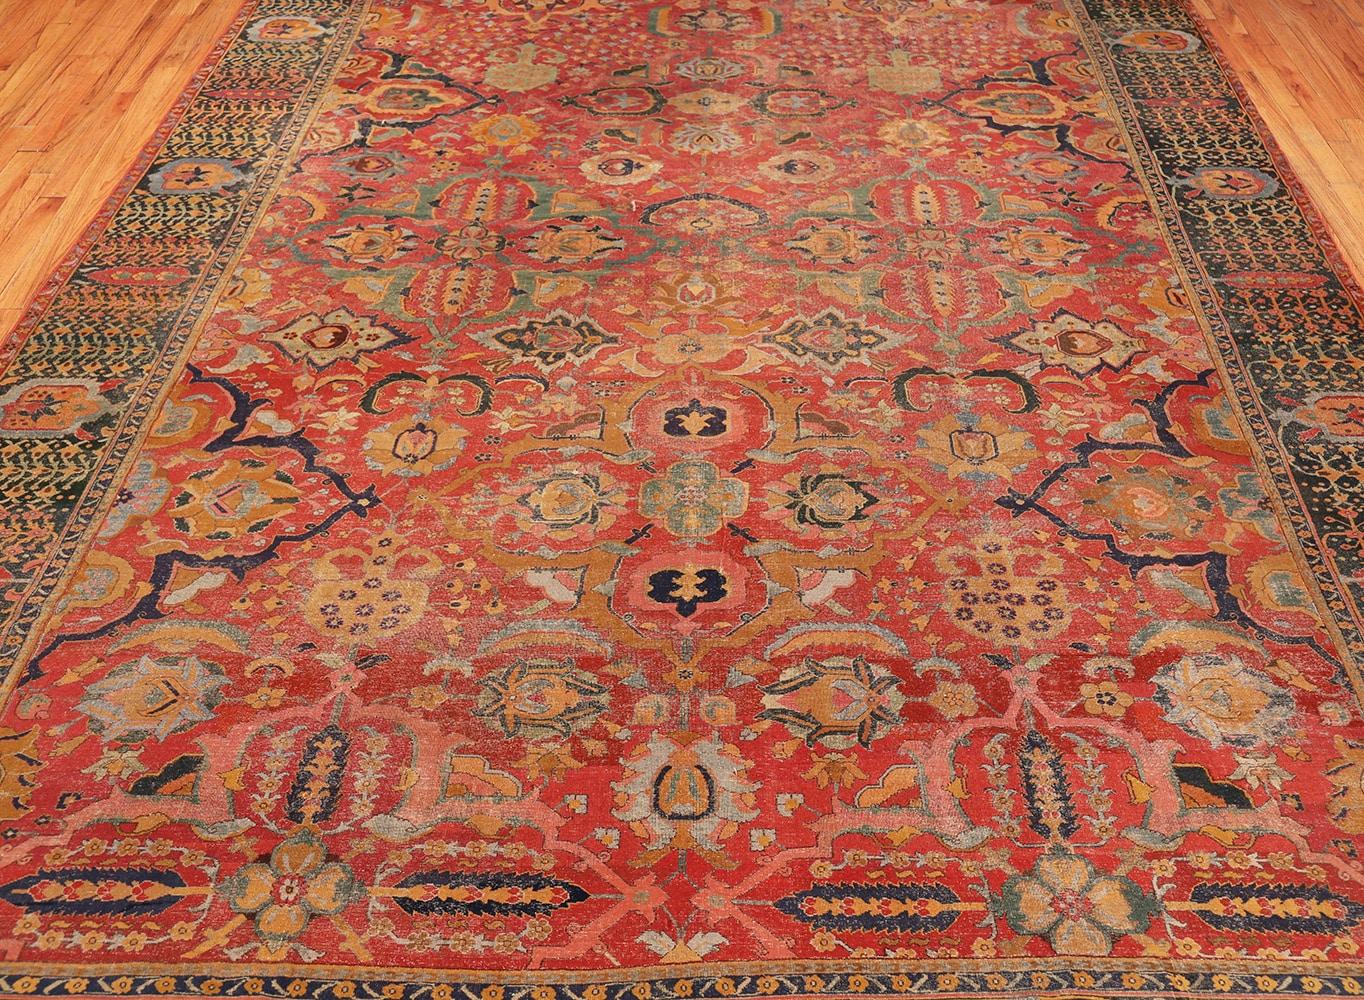 17th Century Antique Persian Isfahan Rug. Size: 11 ft 10 in x 18 ft 1 in 3